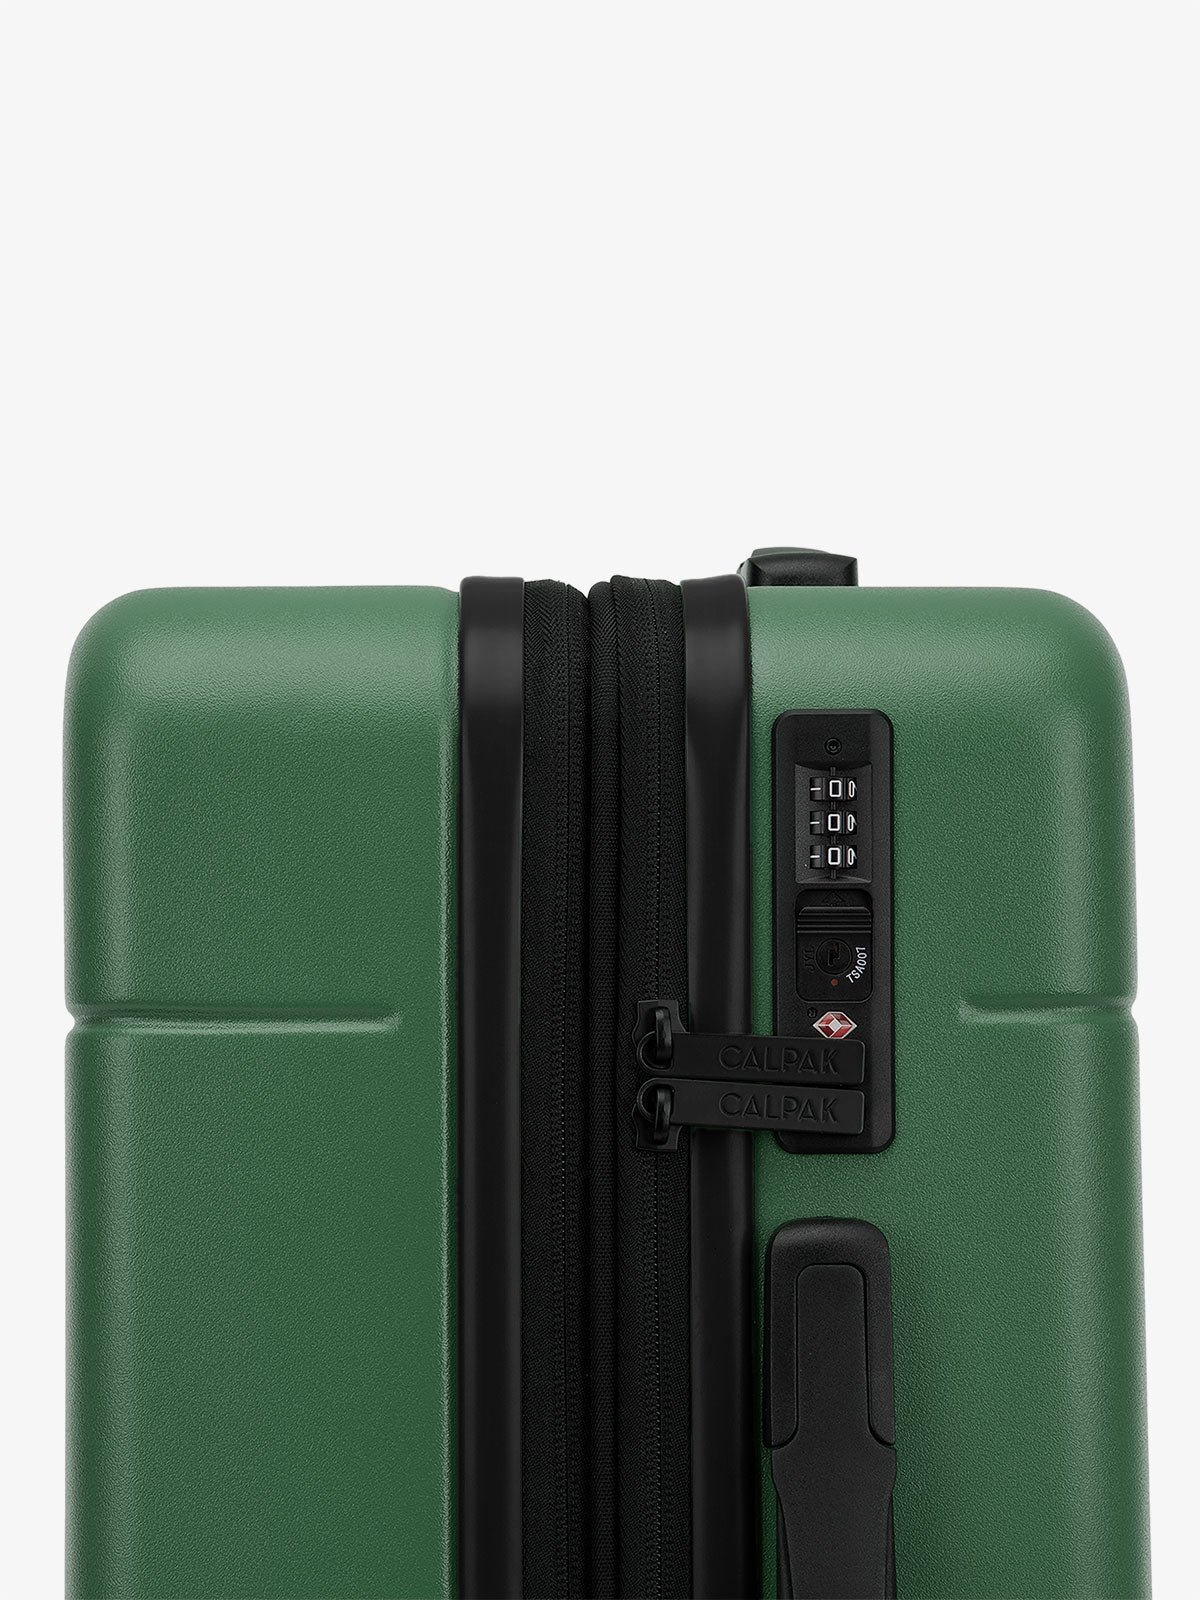 Emerald CALPAK Hue trunk luggage with built in TSA approved lock